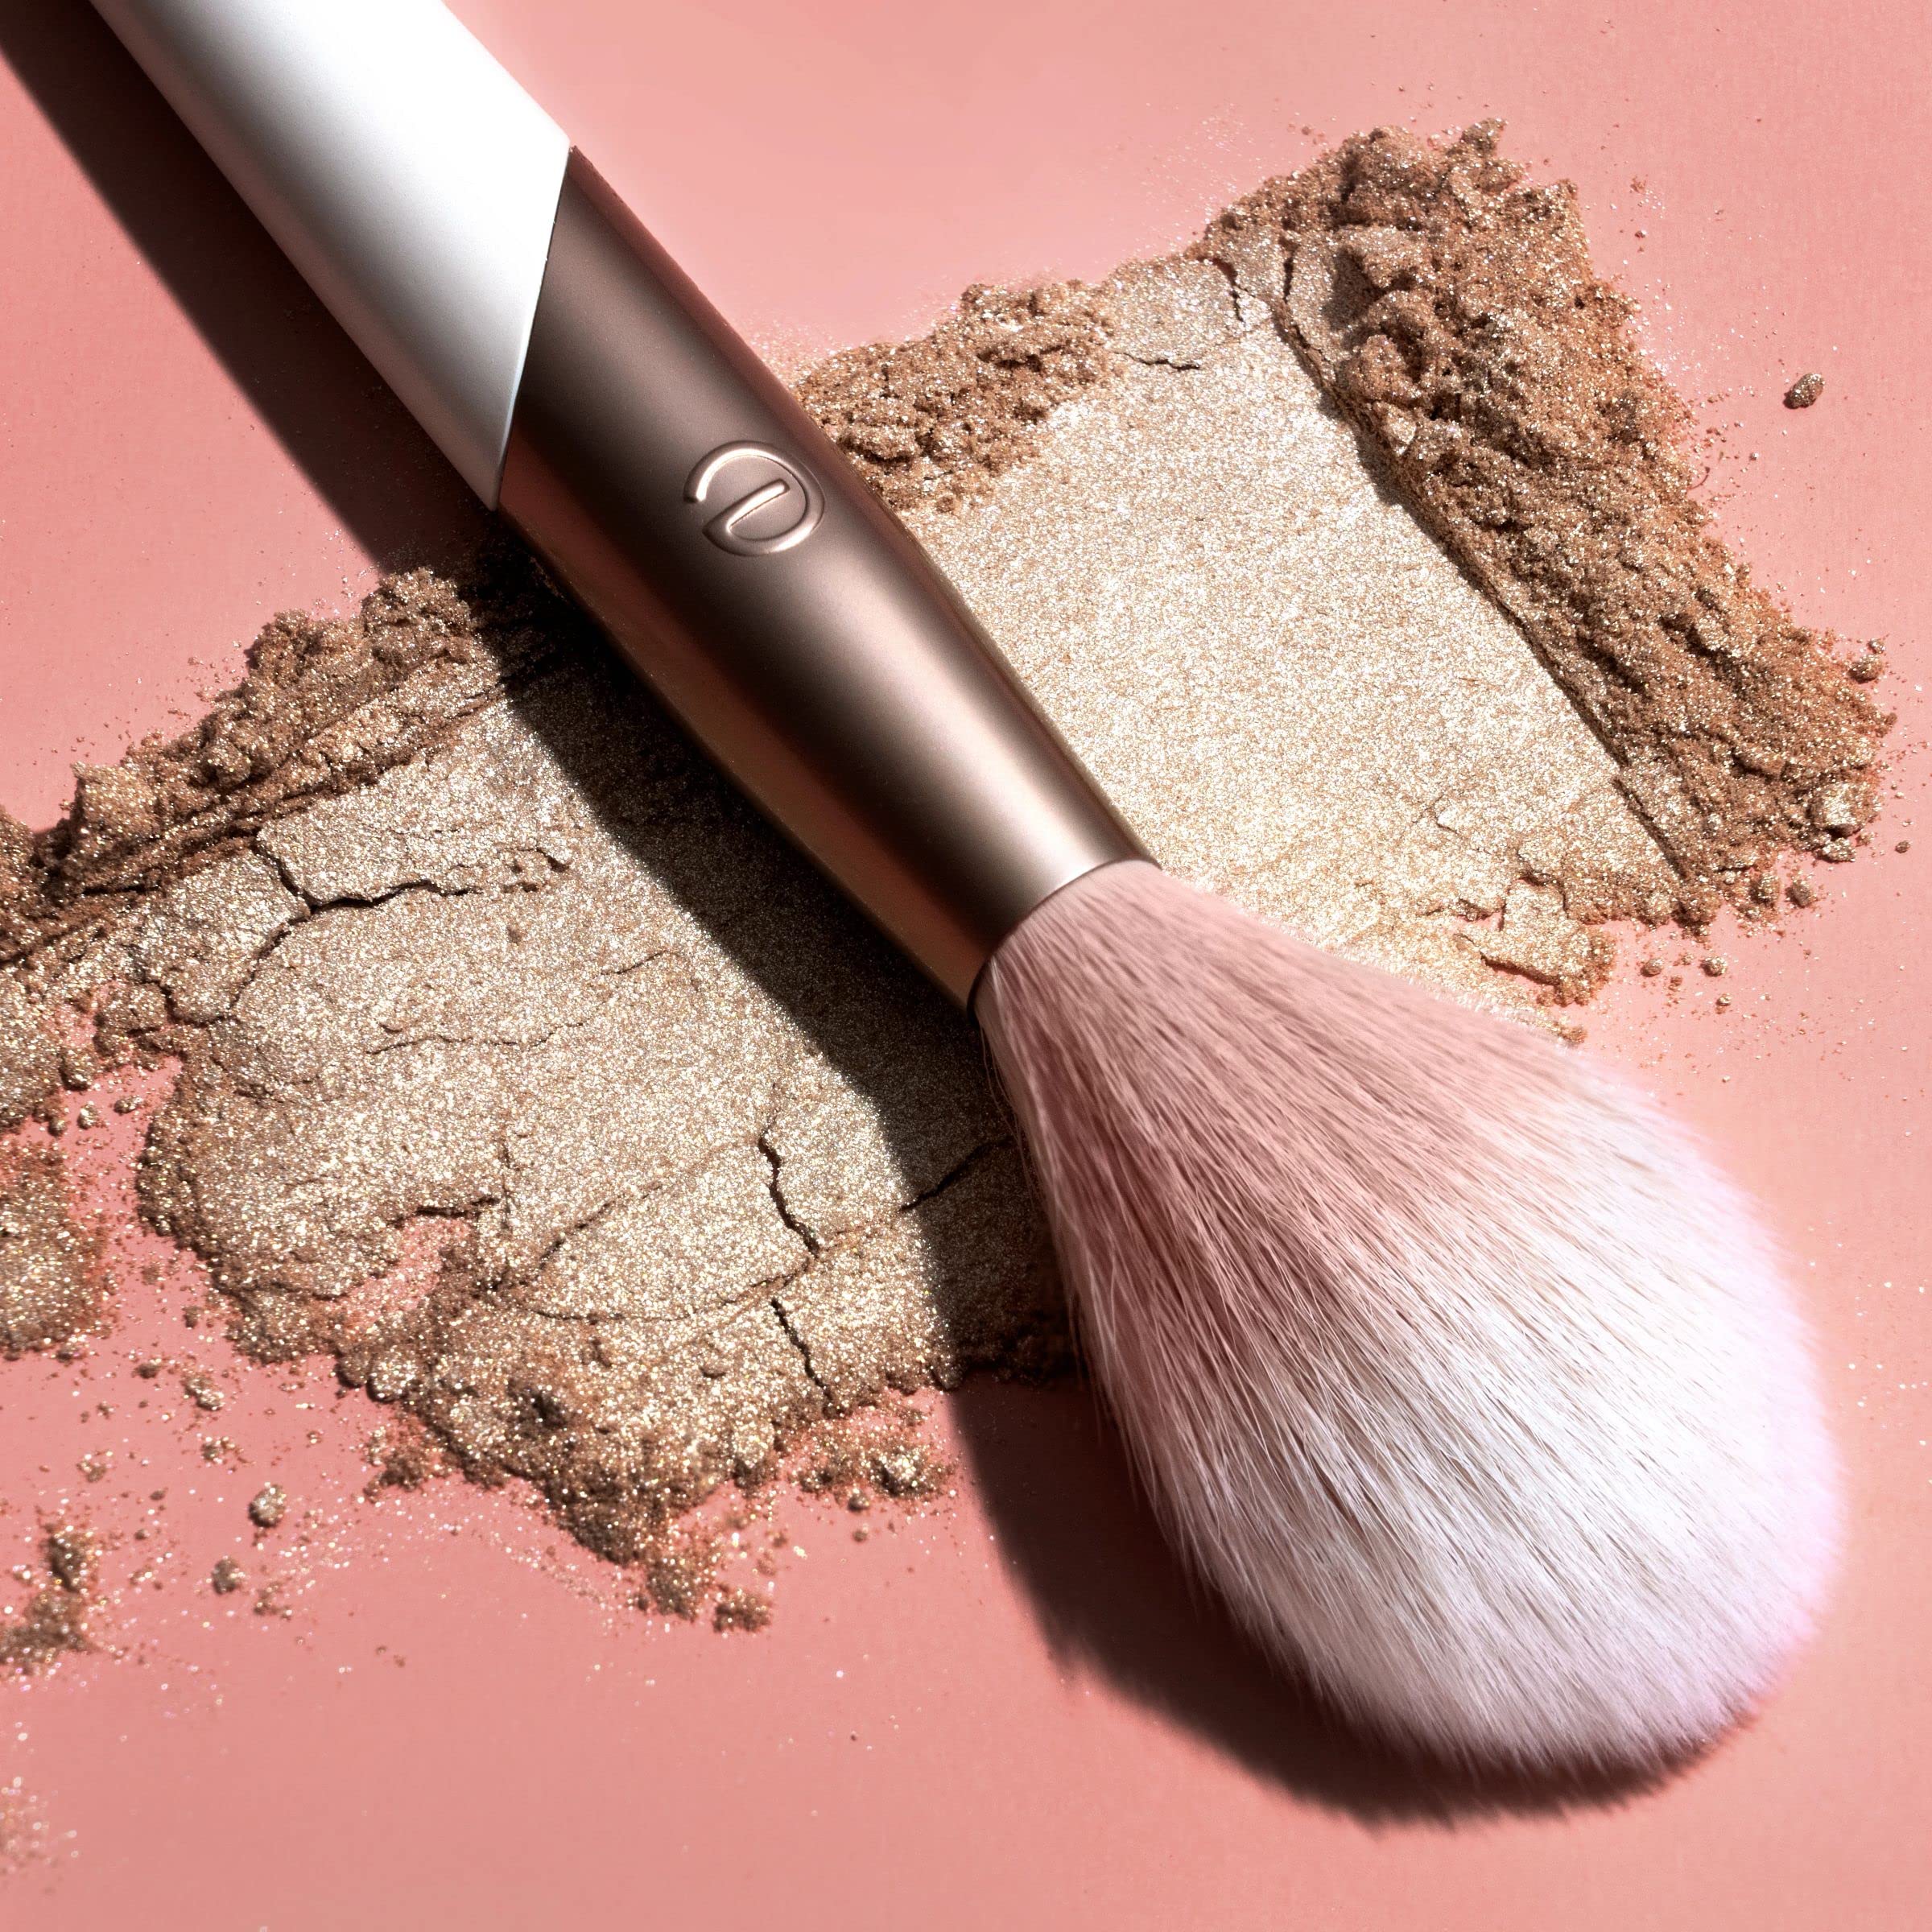 EcoTools Luxe Soft Highlighter Makeup Face Powder Brush, Sheer, Luminous Glow, Premium Quality Makeup Brush, Ultra Soft, Synthetic Bristles, Eco Friendly Face Brush, Cruelty-Free, 1 Count